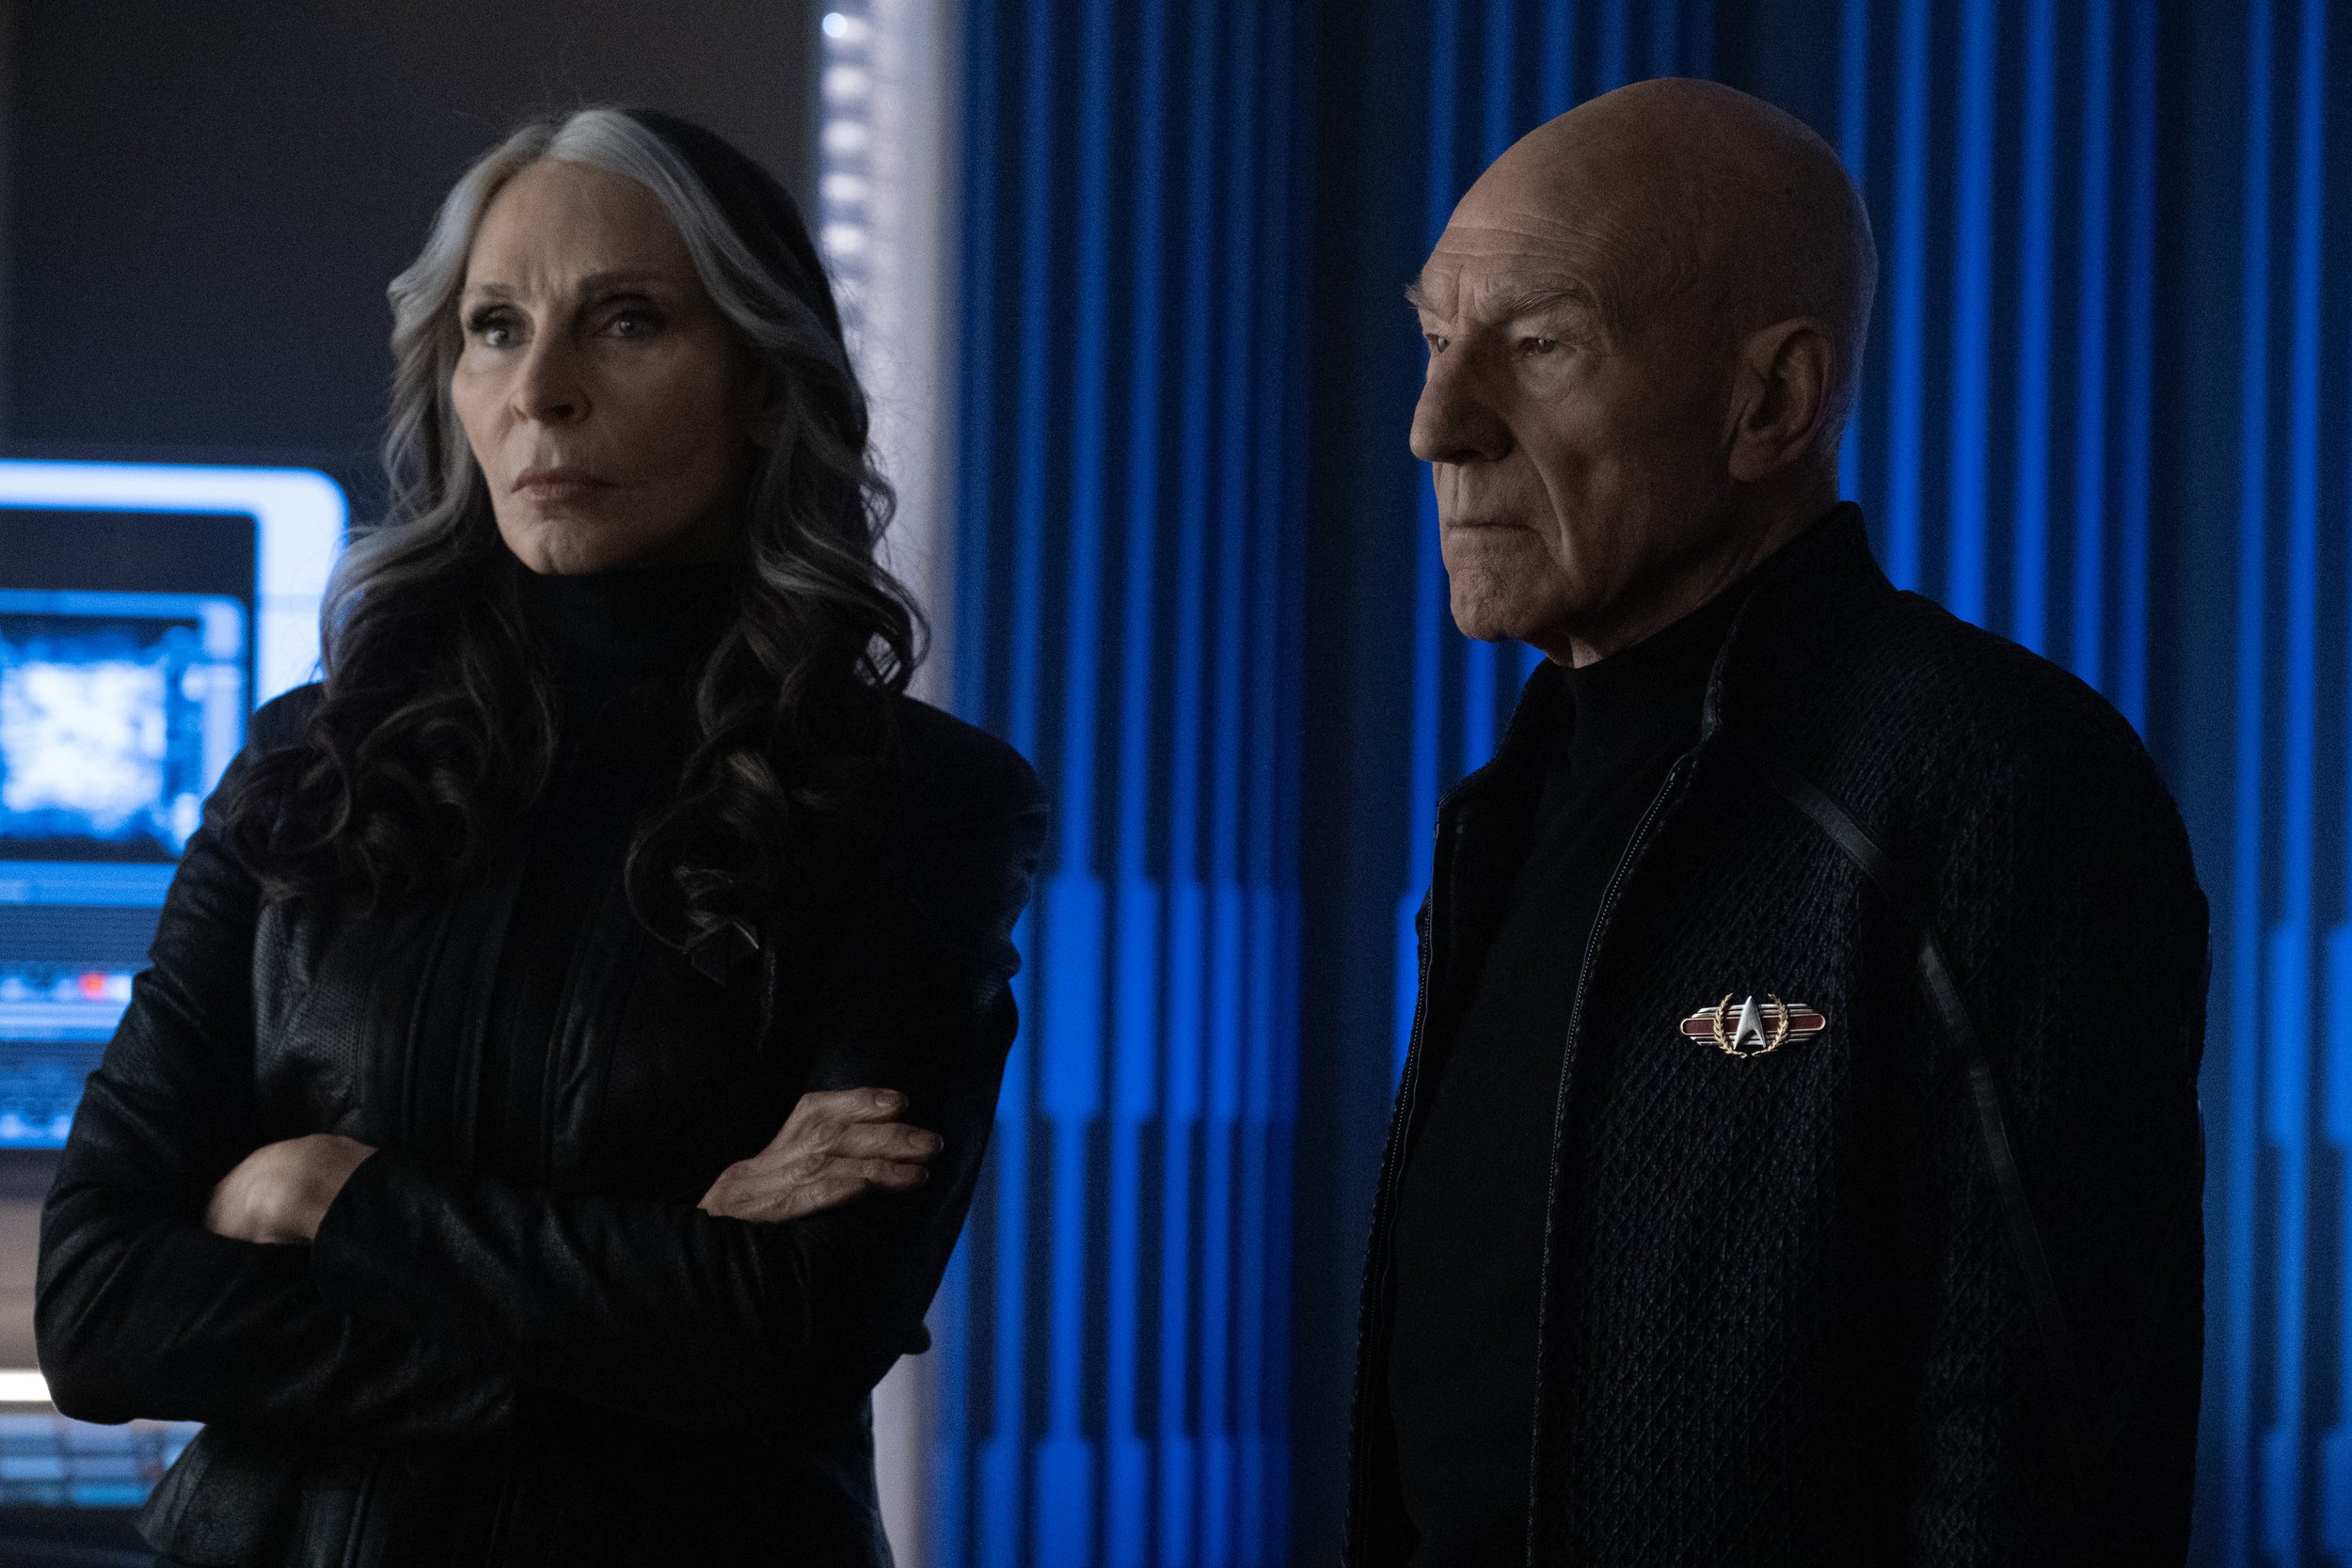   Gates McFadden  as Dr. Beverly Crusher and  Patrick Stewart  as Picard.  Photo Credit: Trae Patton/Paramount+.  